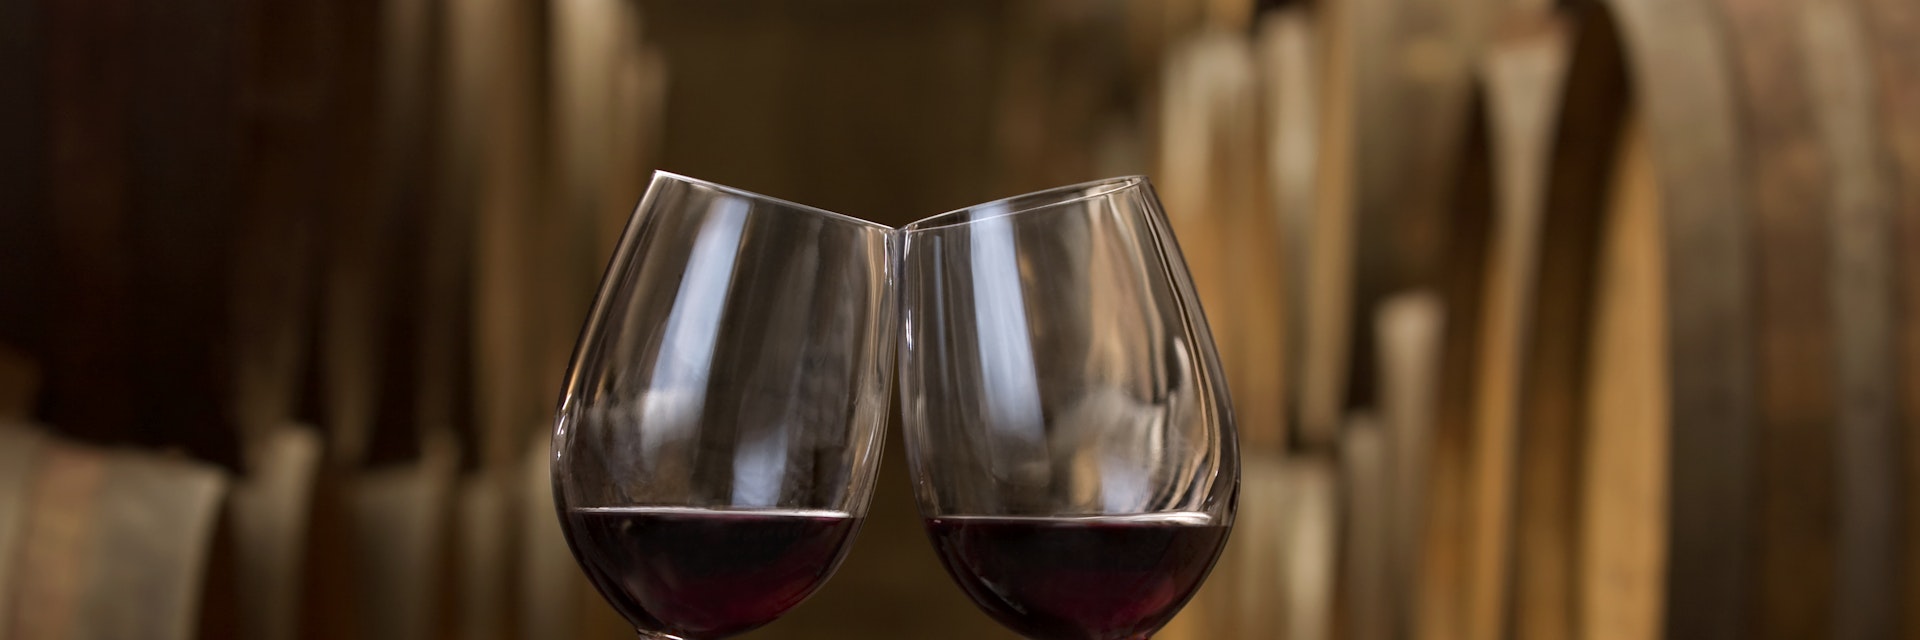 "Two hands holding wineglasses wi red wine make a toast in a cellar in front of a row of oak barrels,See also:"